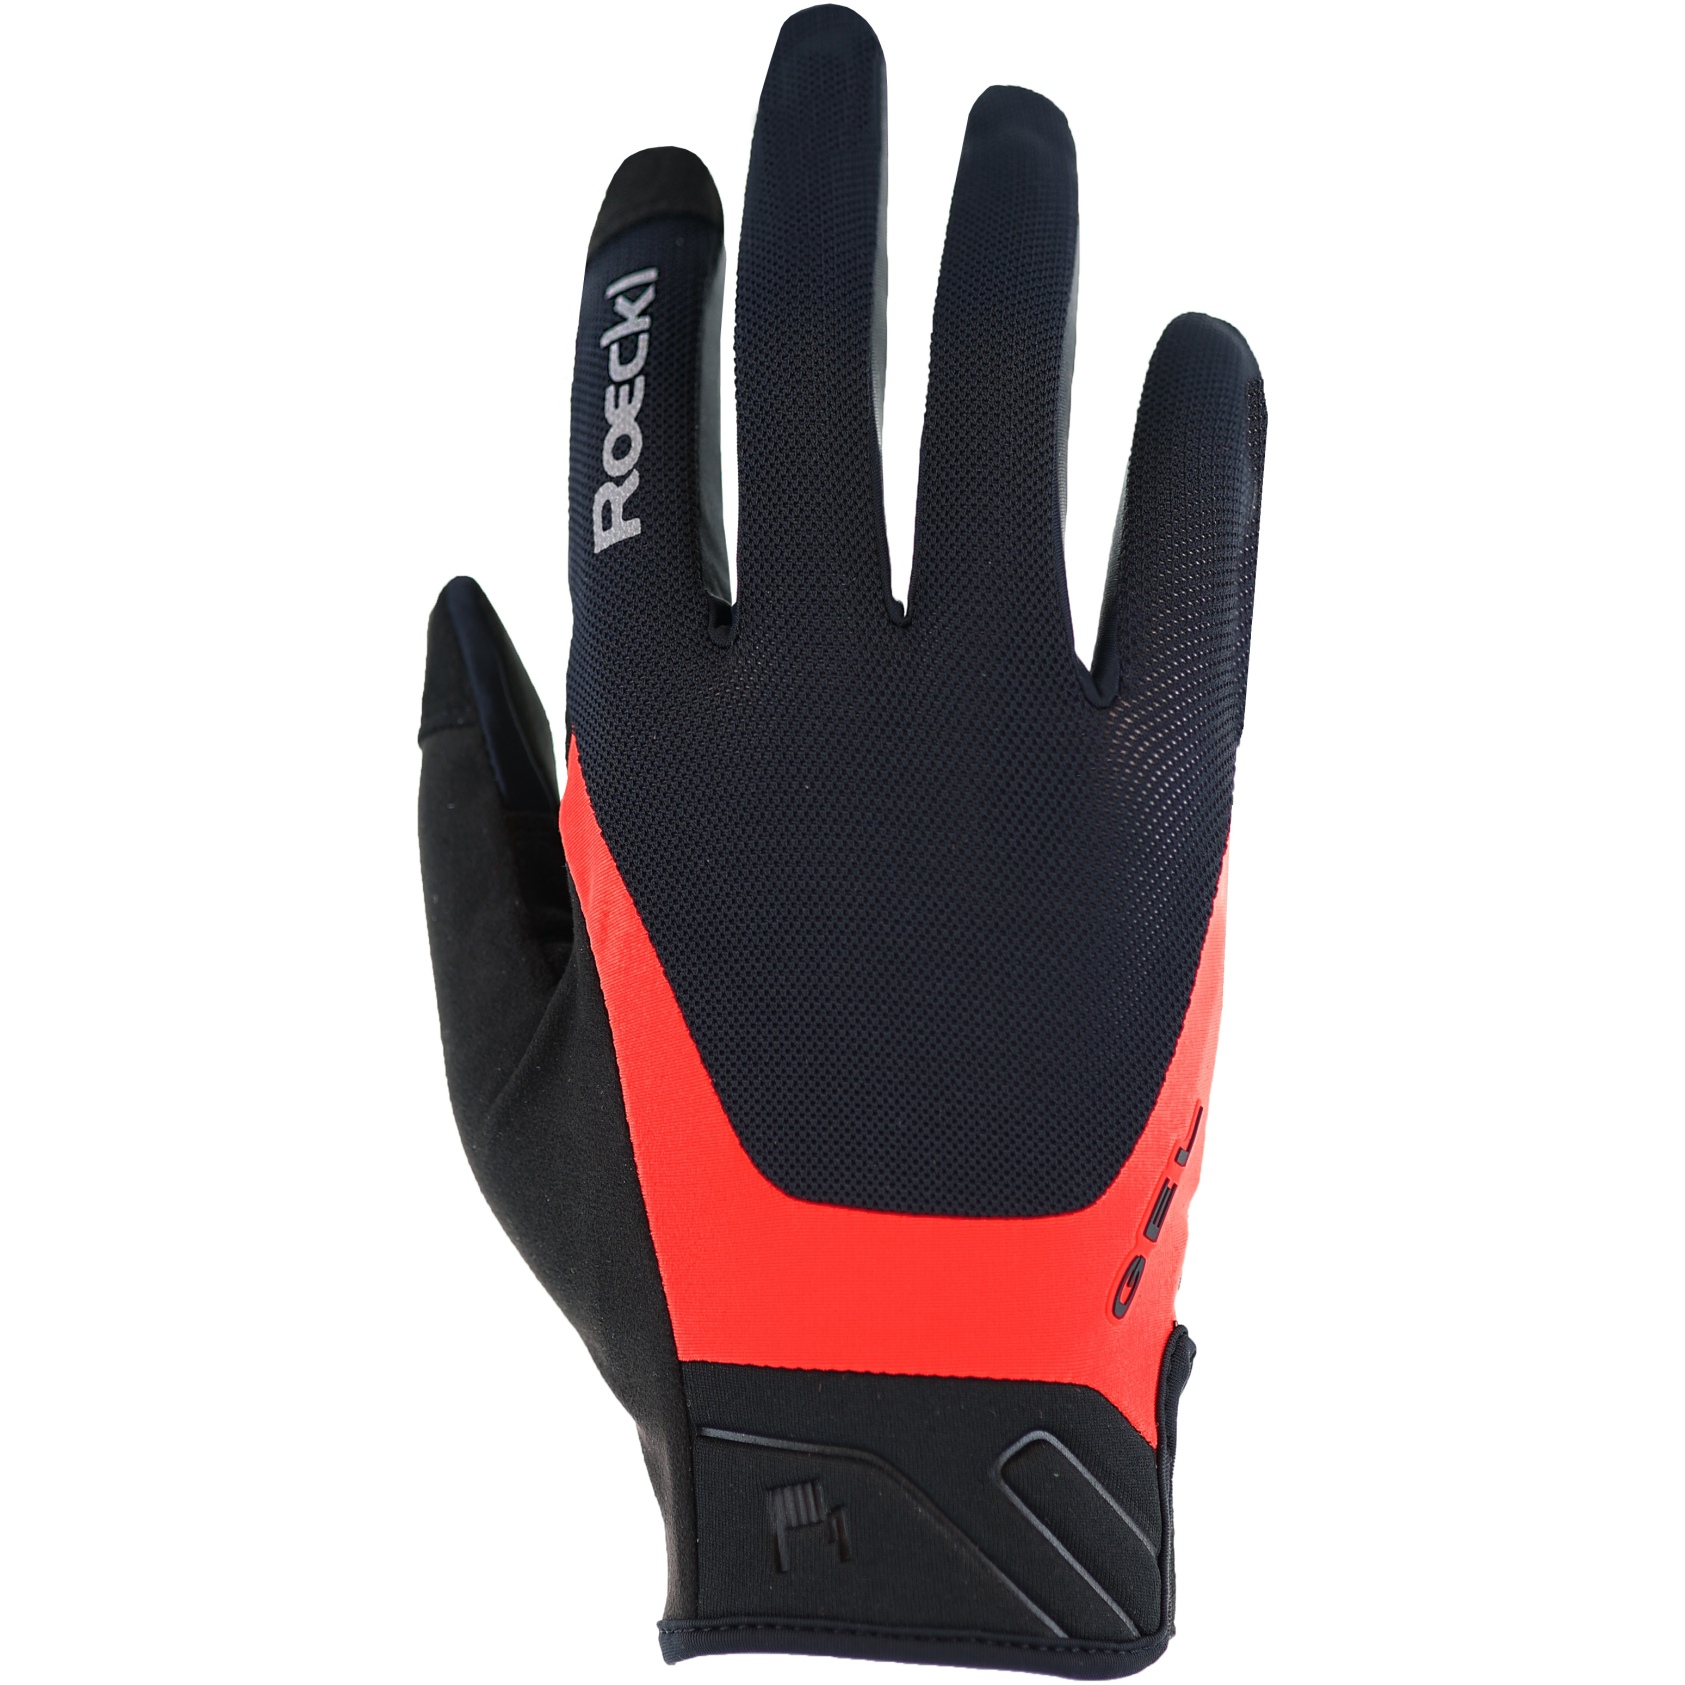 Image of Roeckl Sports Mori 2 Cycling Gloves - black/bittersweet 9302